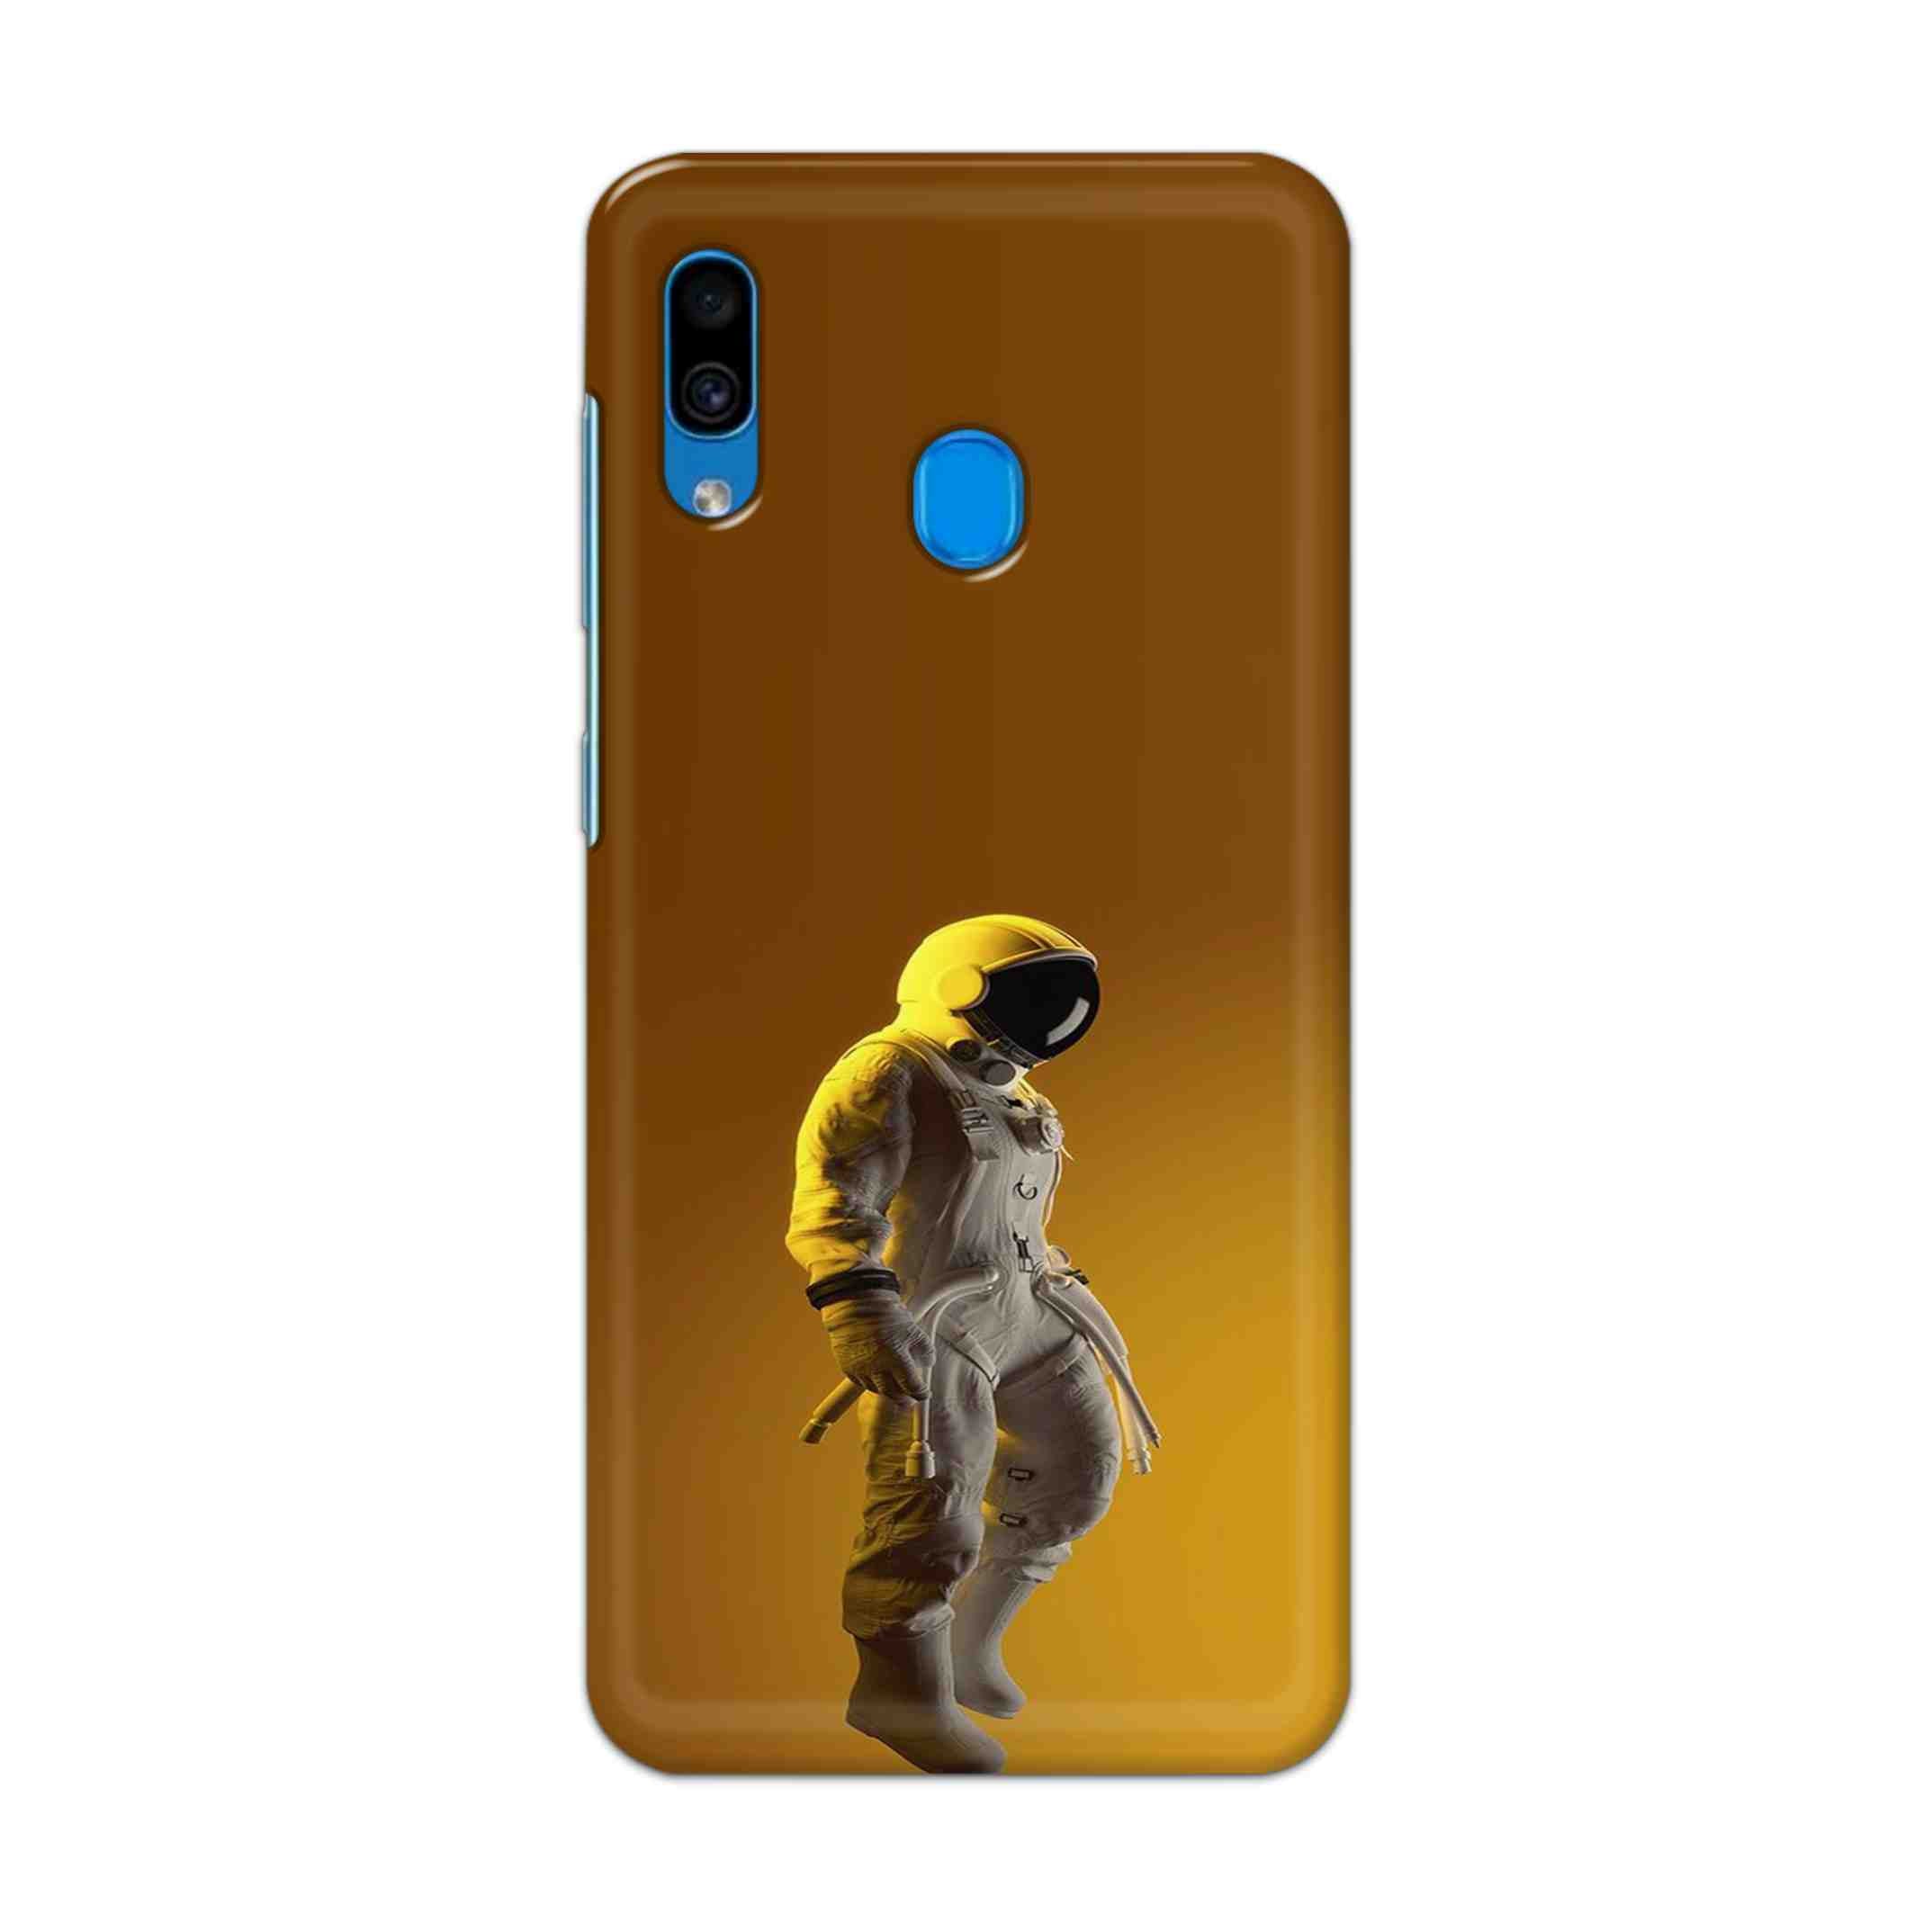 Buy Yellow Astronaut Hard Back Mobile Phone Case Cover For Samsung Galaxy A30 Online